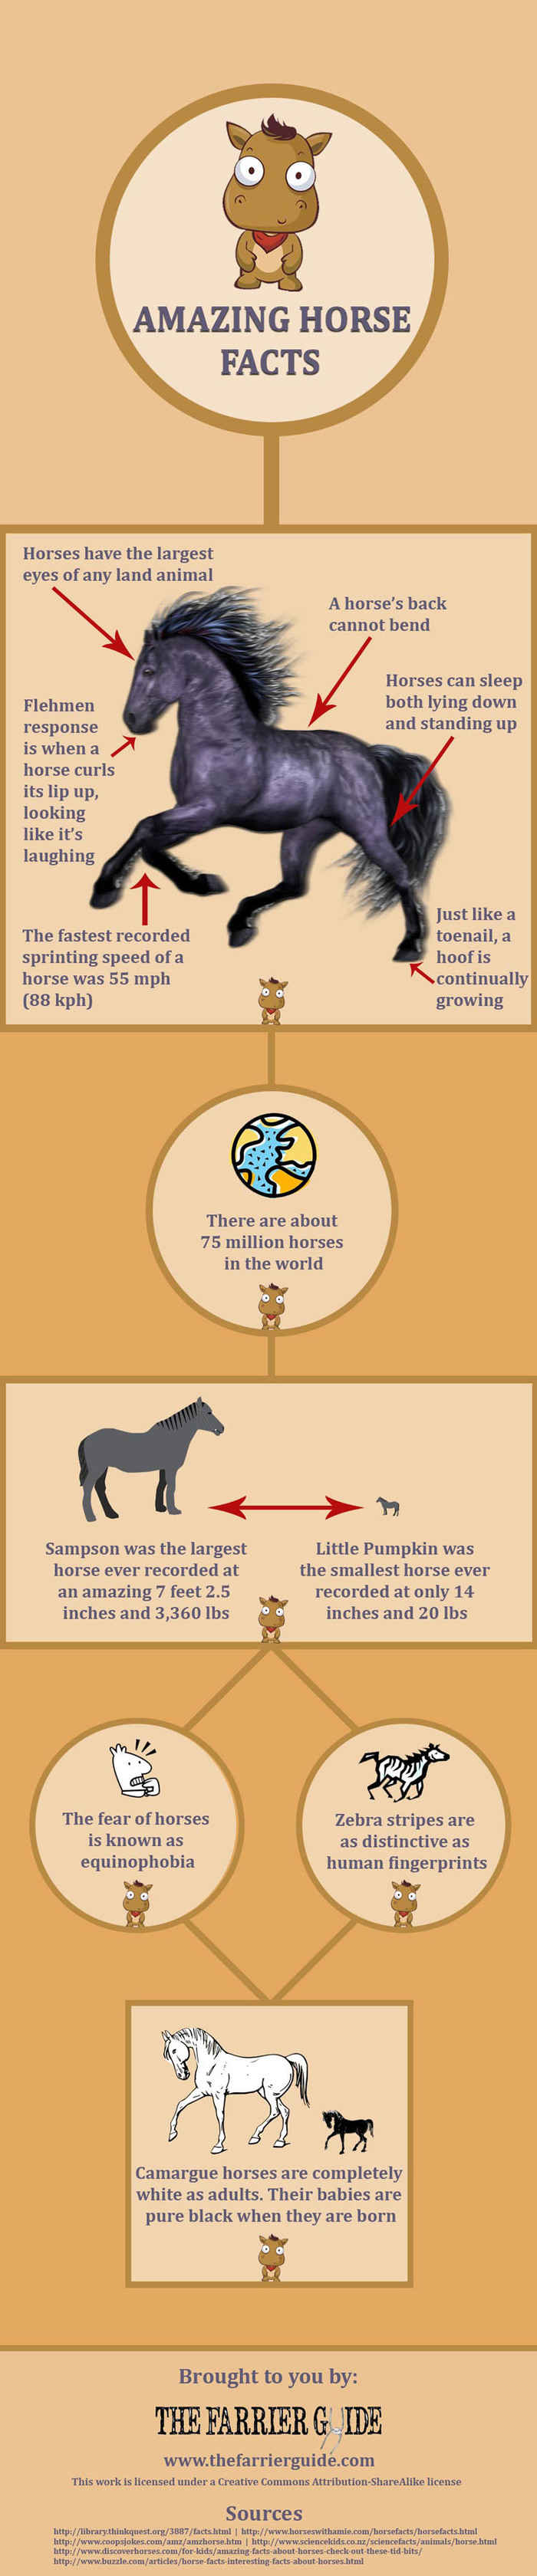 Amazing Horse Facts infographic